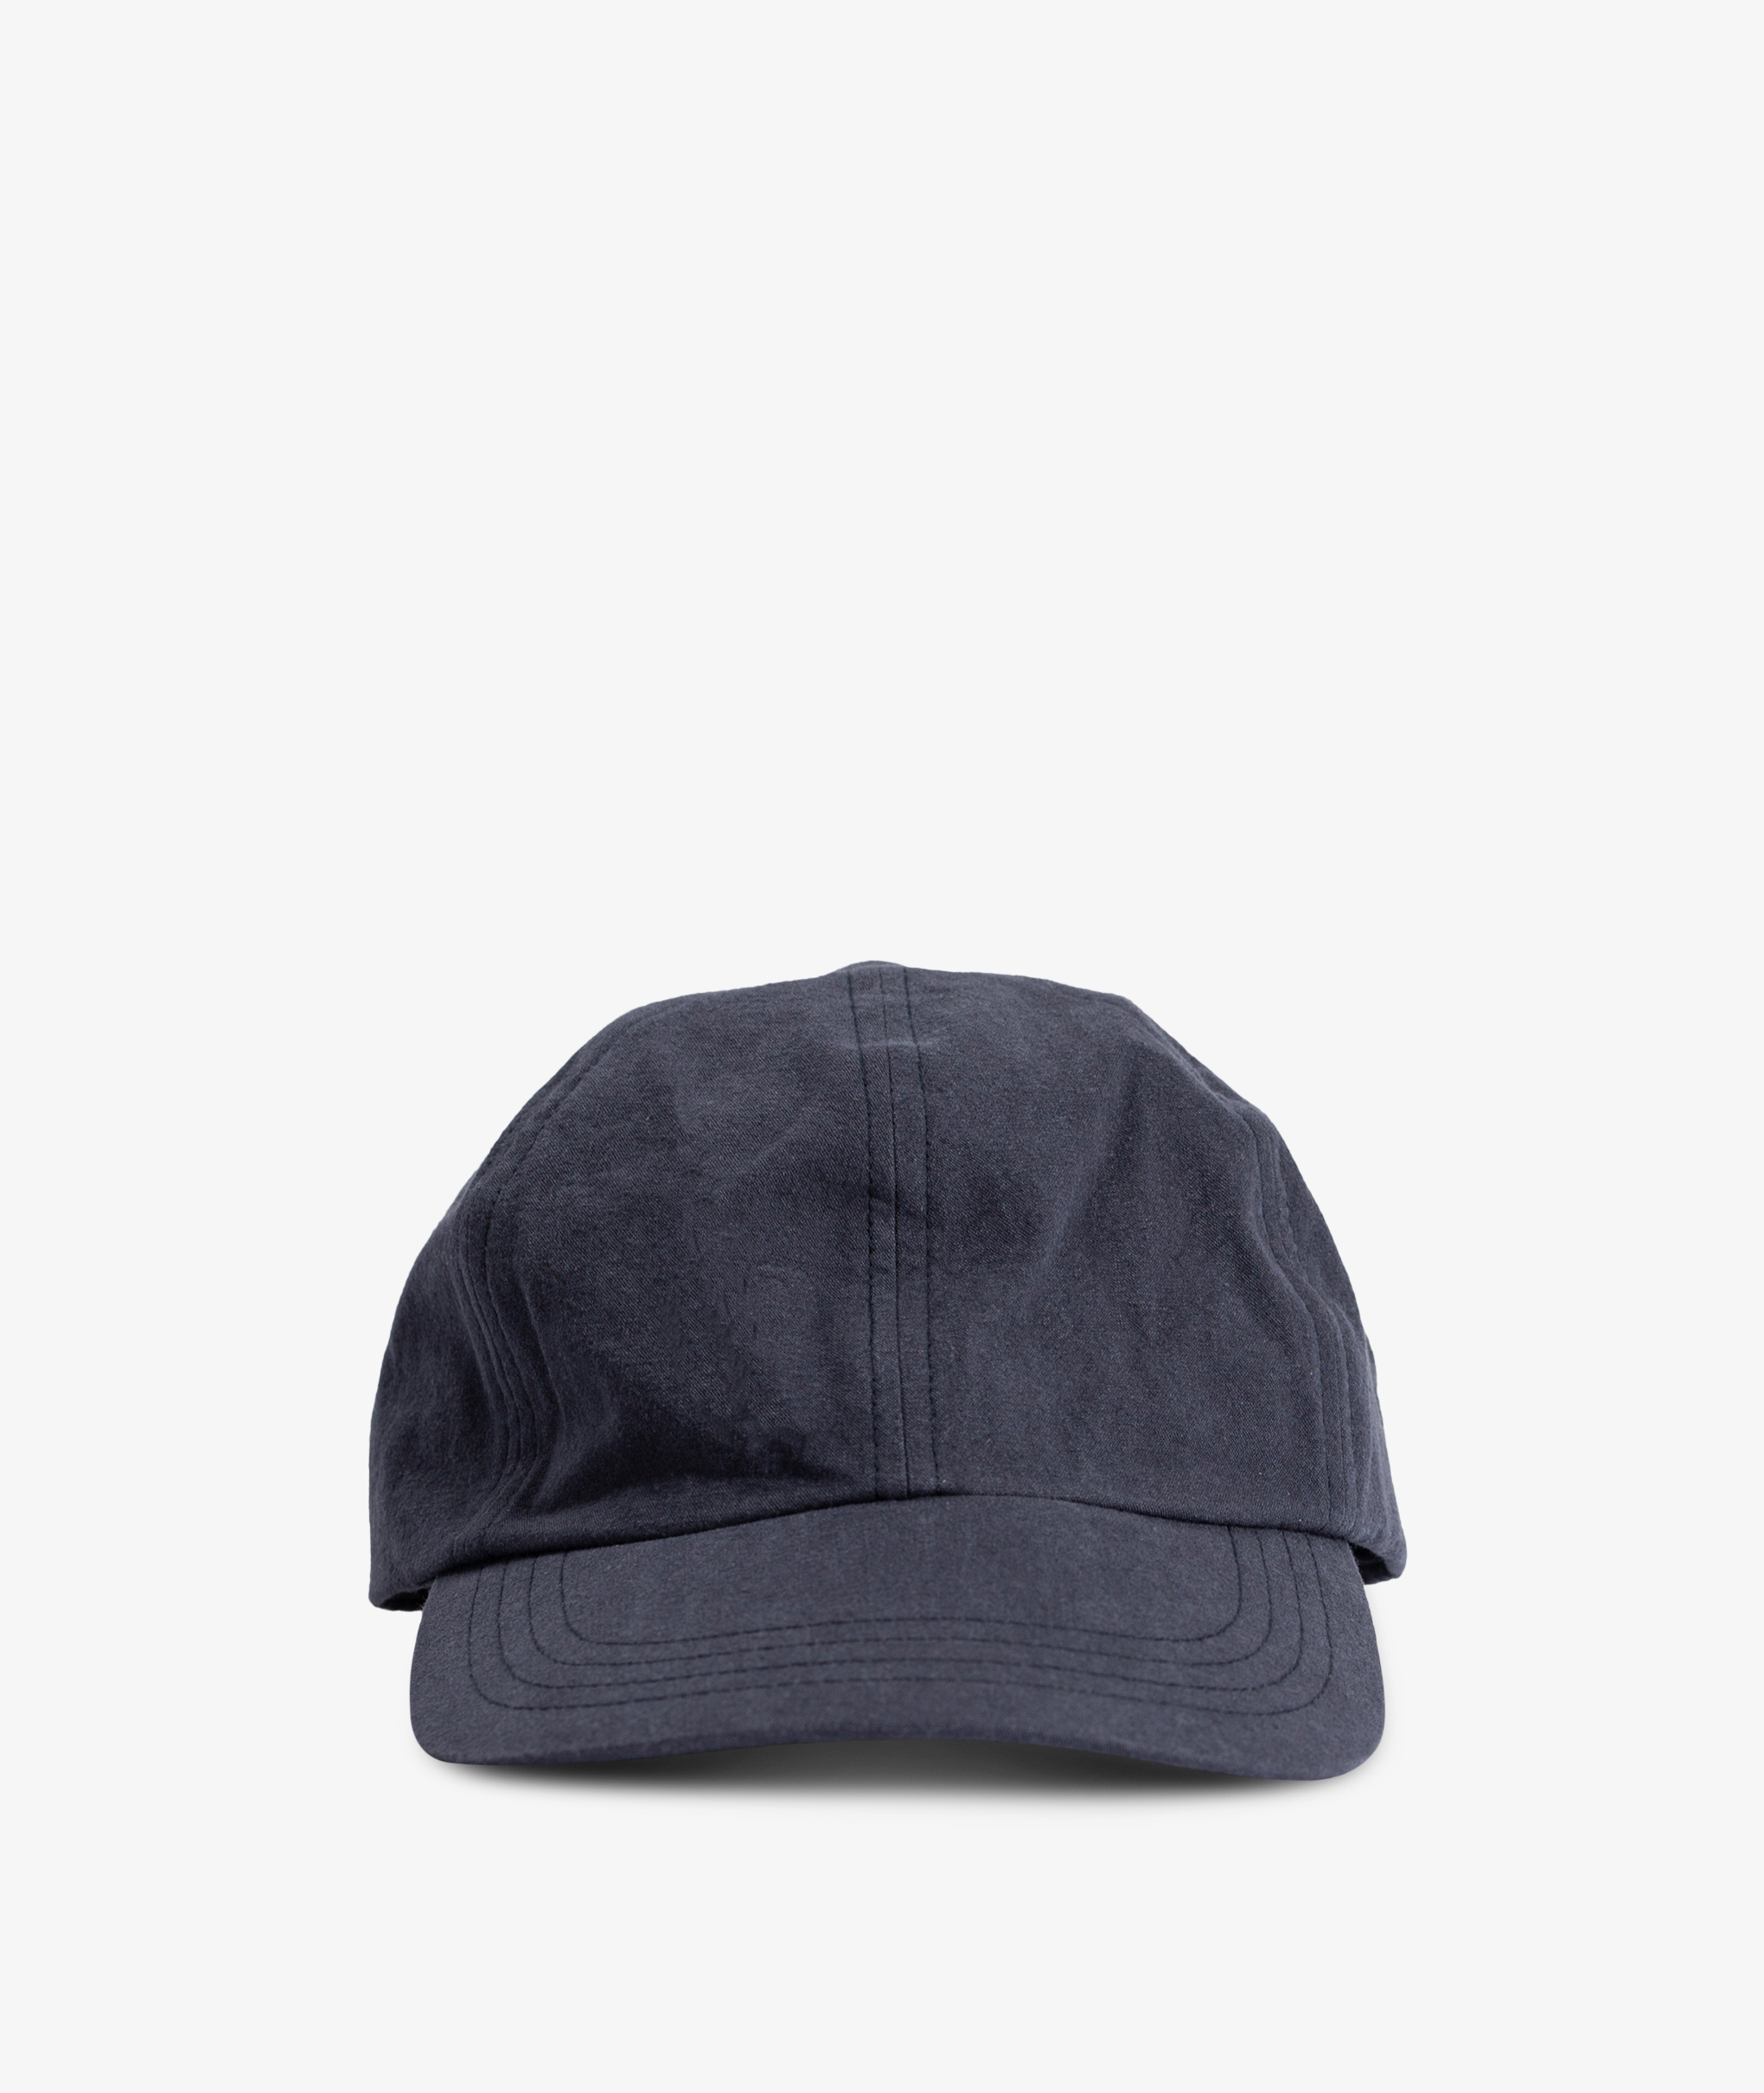 Norse Store | Shipping Worldwide - MAN-TLE R13 Cap-3 - Tint